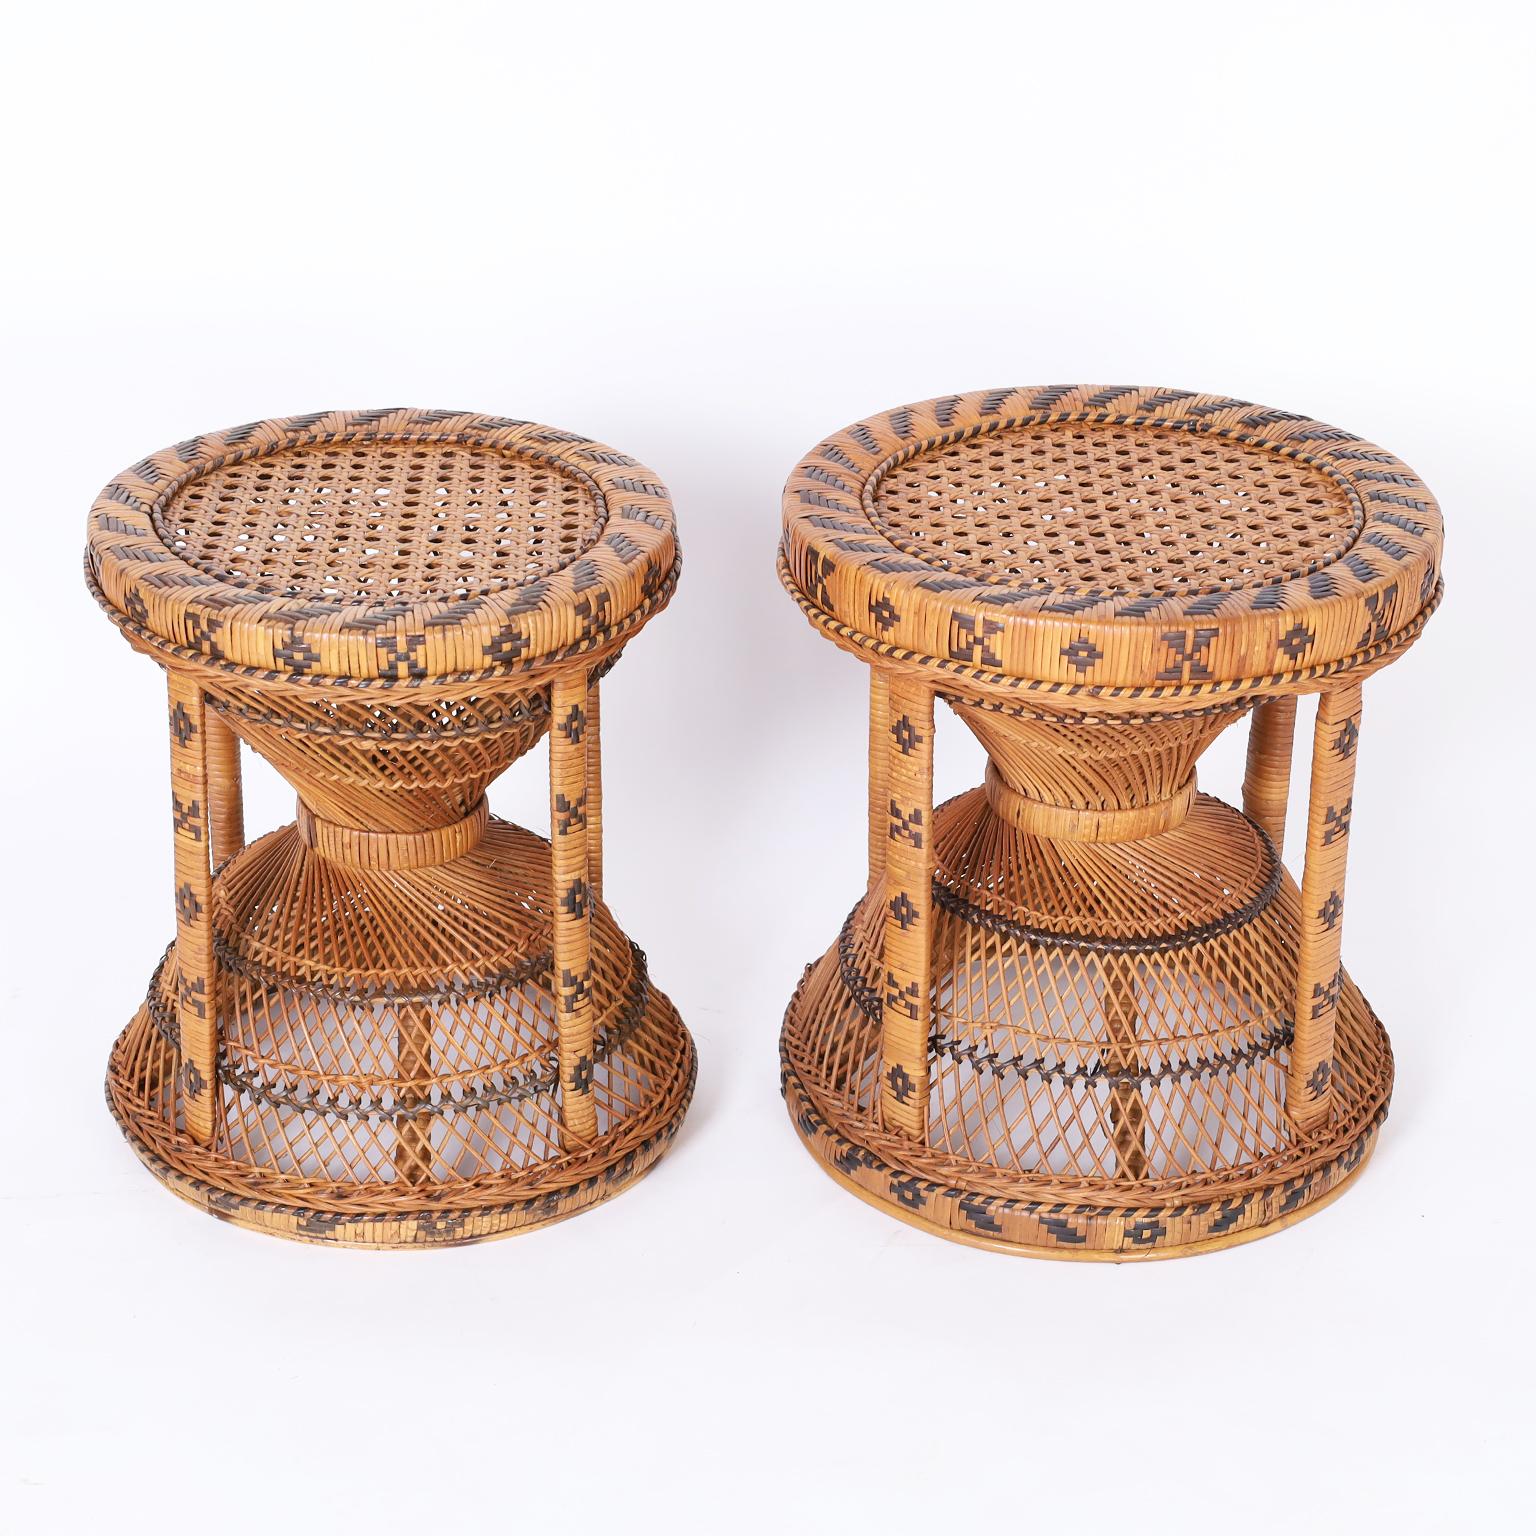 Anglo Indian near pair of ottomans crafted with wicker and reed in a classic hourglass form with caned seats and painted geometric designs.
 